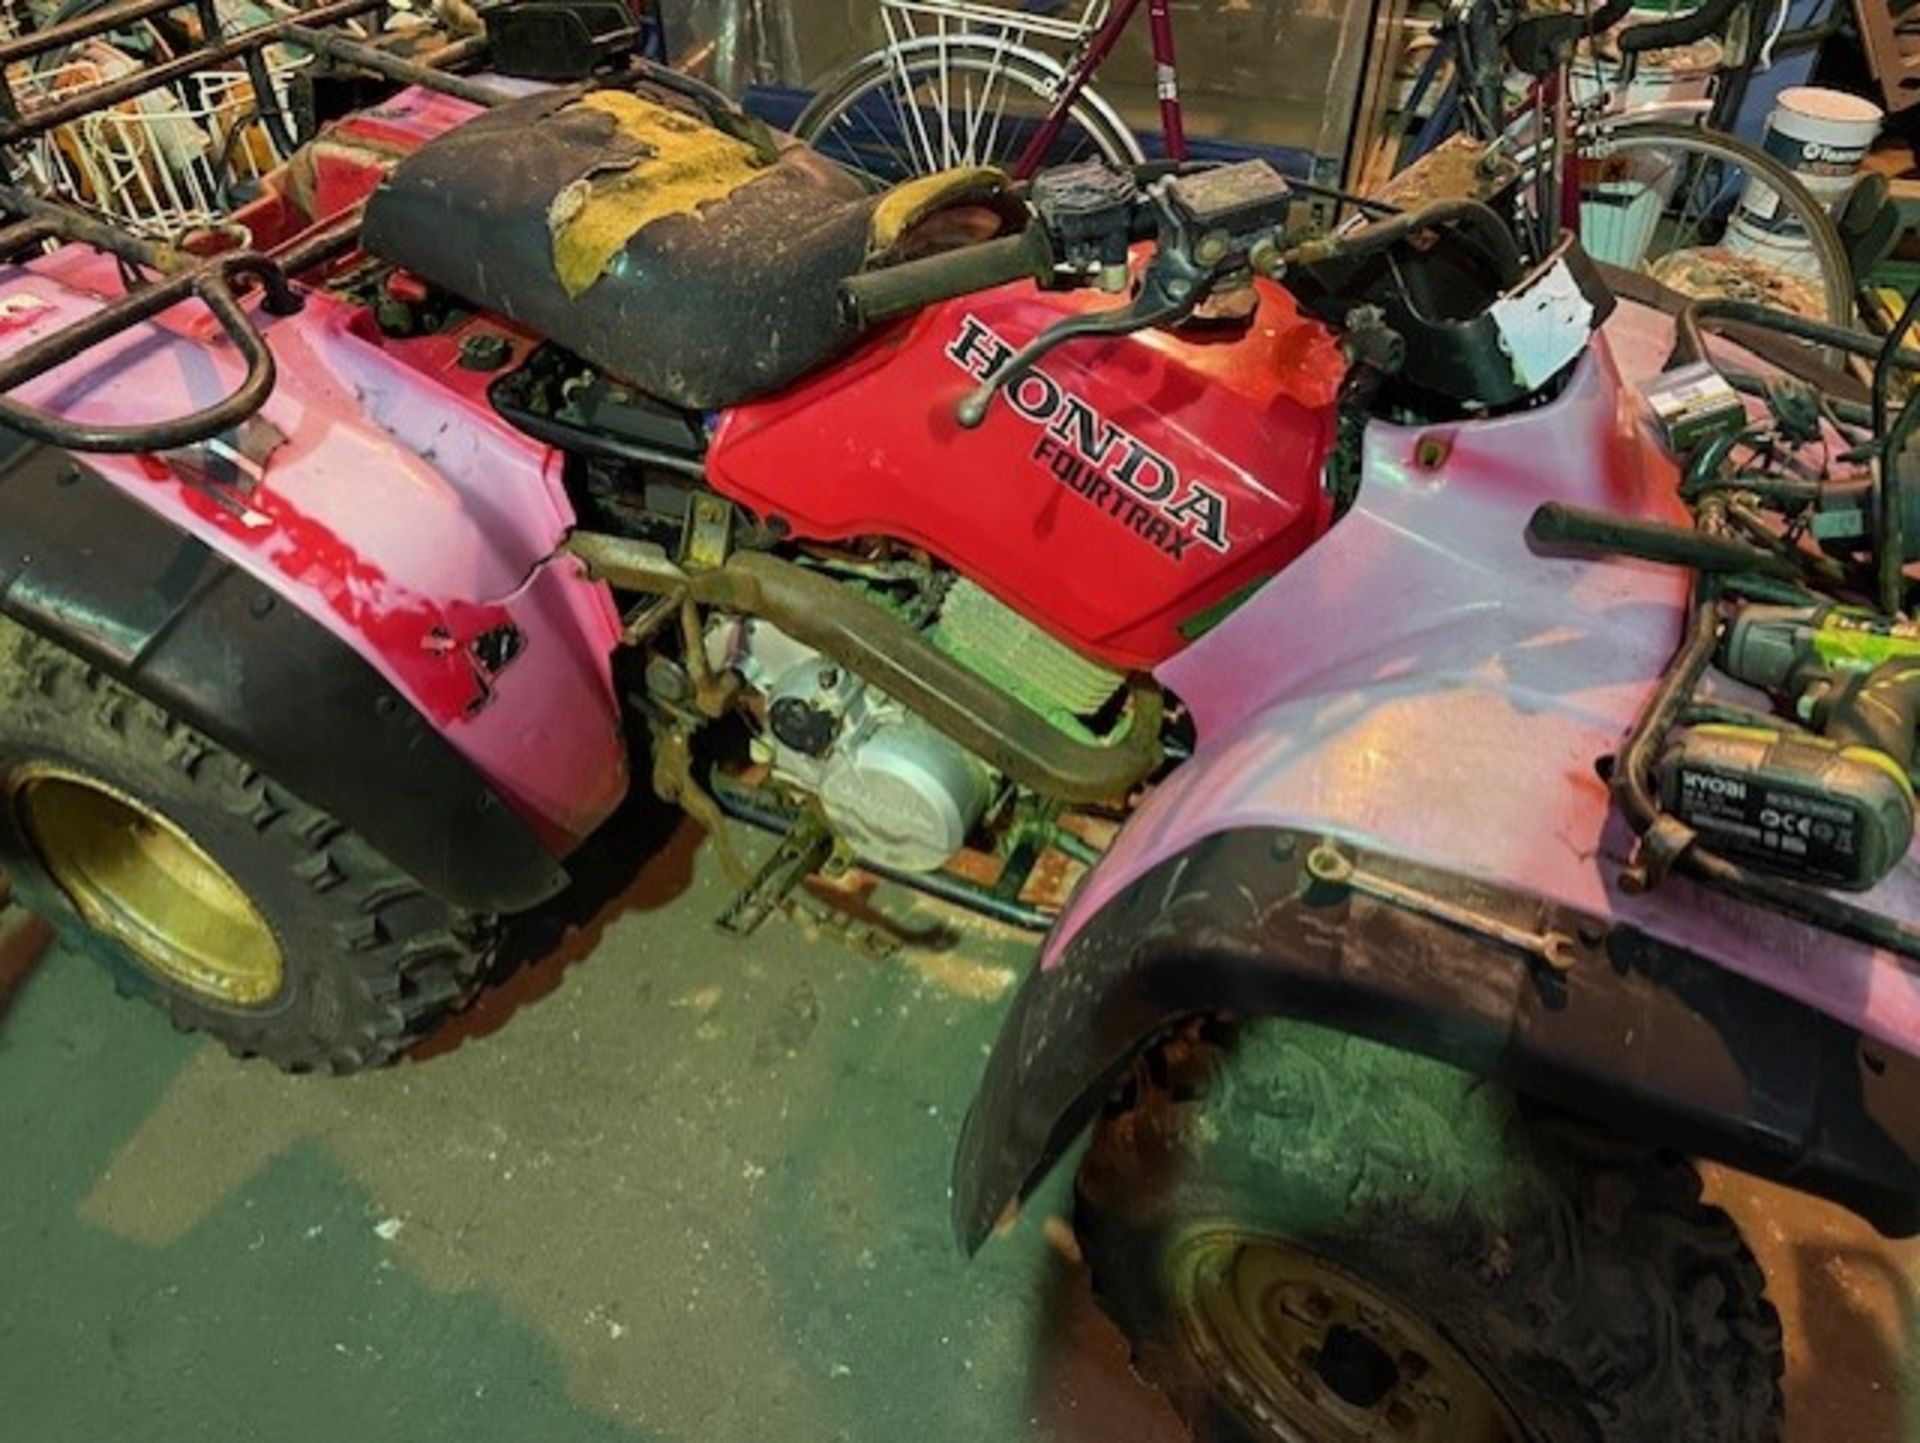 Honda fortrax quad bike late 80s non runner all together